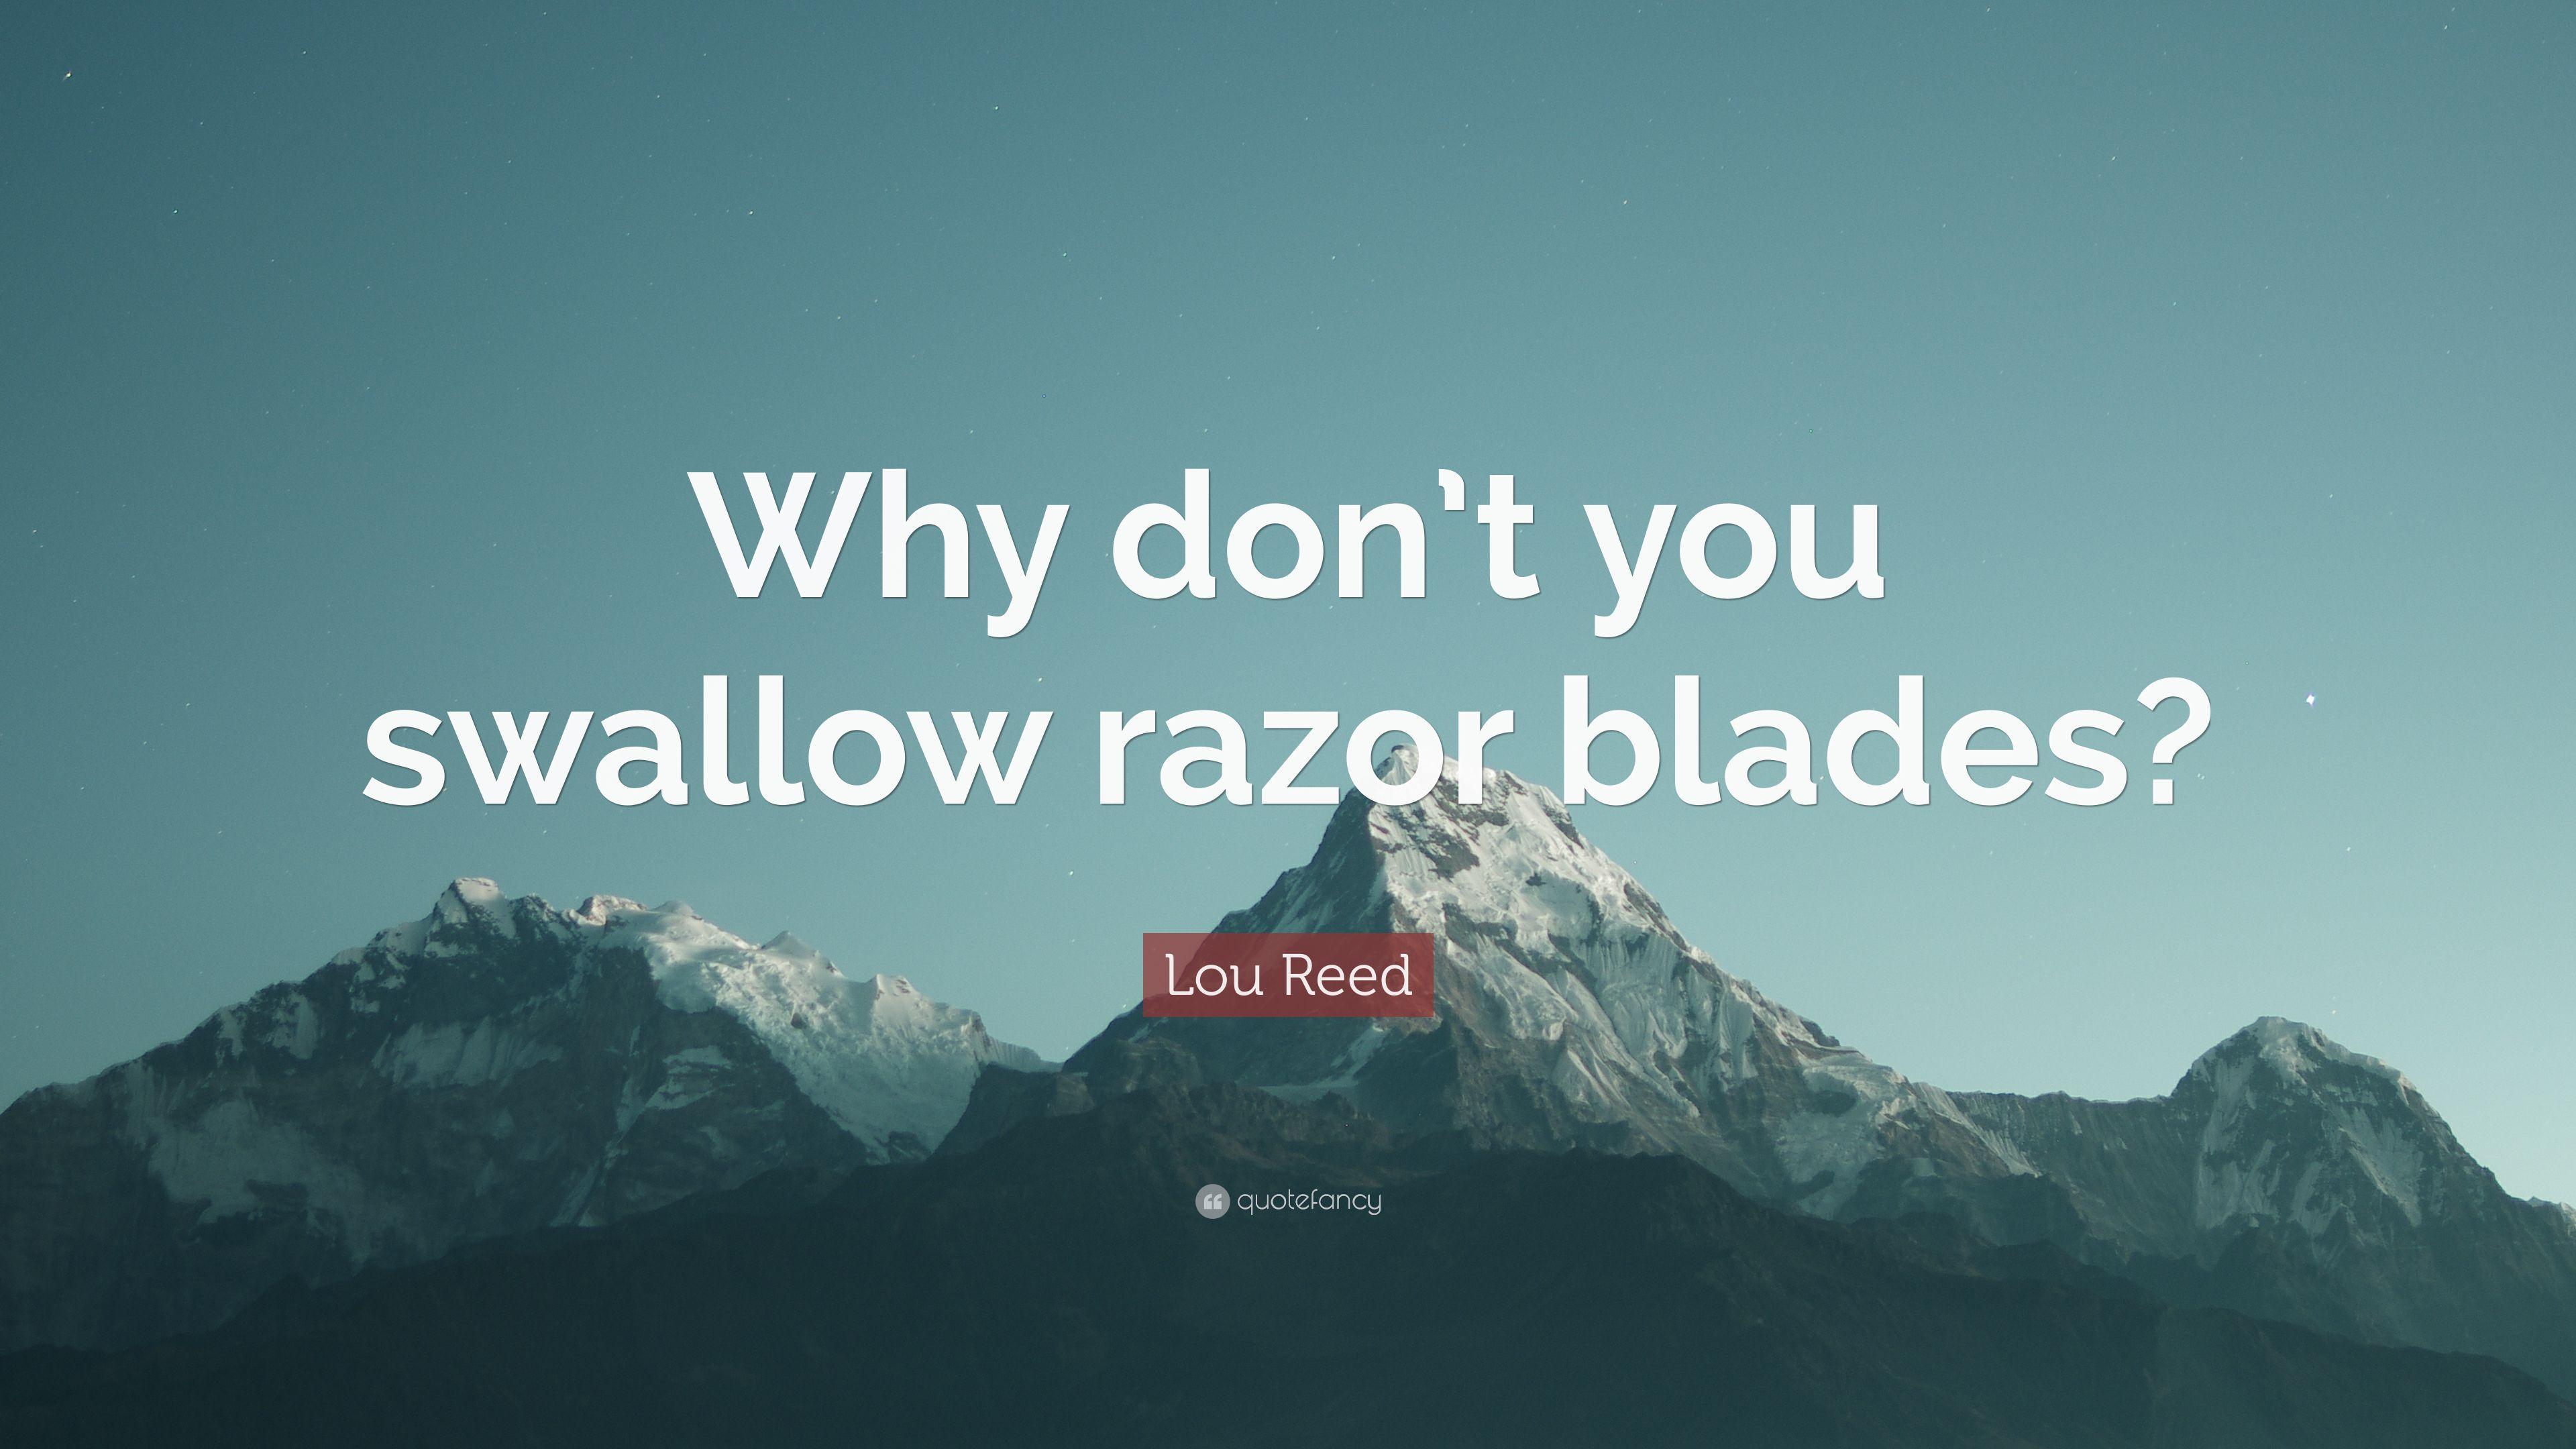 Lou Reed Quote: “Why don't you swallow razor blades?” 7